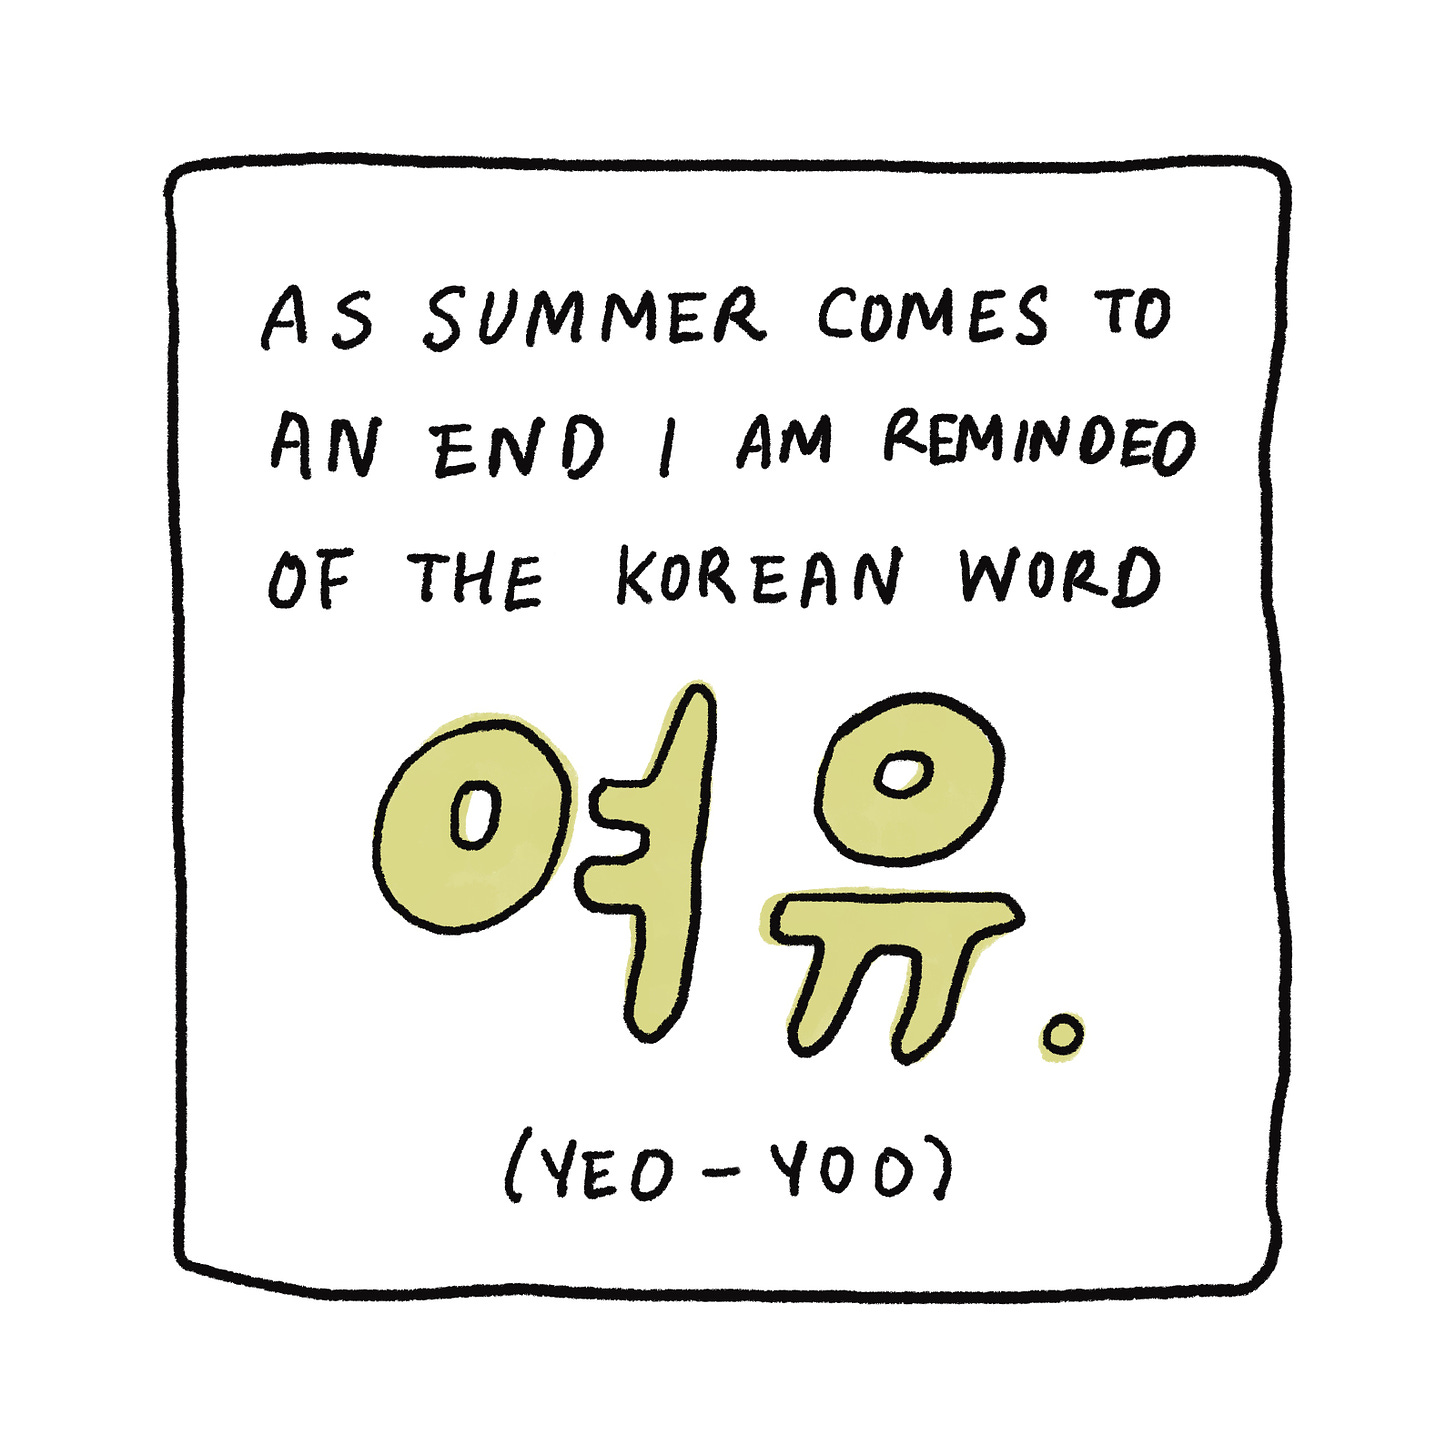 As summer comes to an end I am reminded of the Korean word 여유.